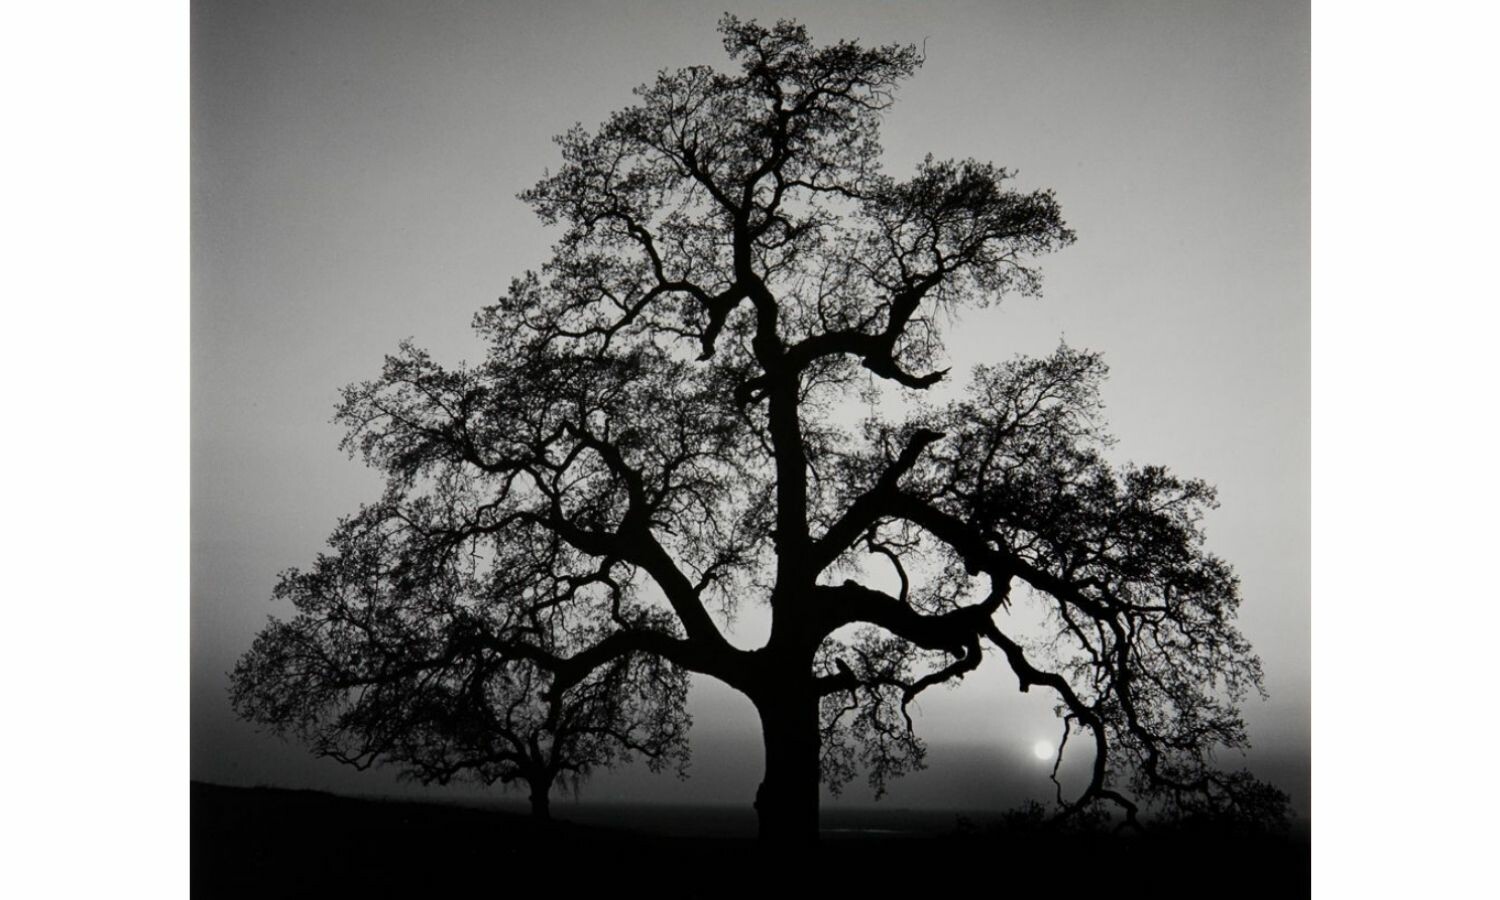 A black and white shot of an oak tree with its lower branches drooping towards the ground.